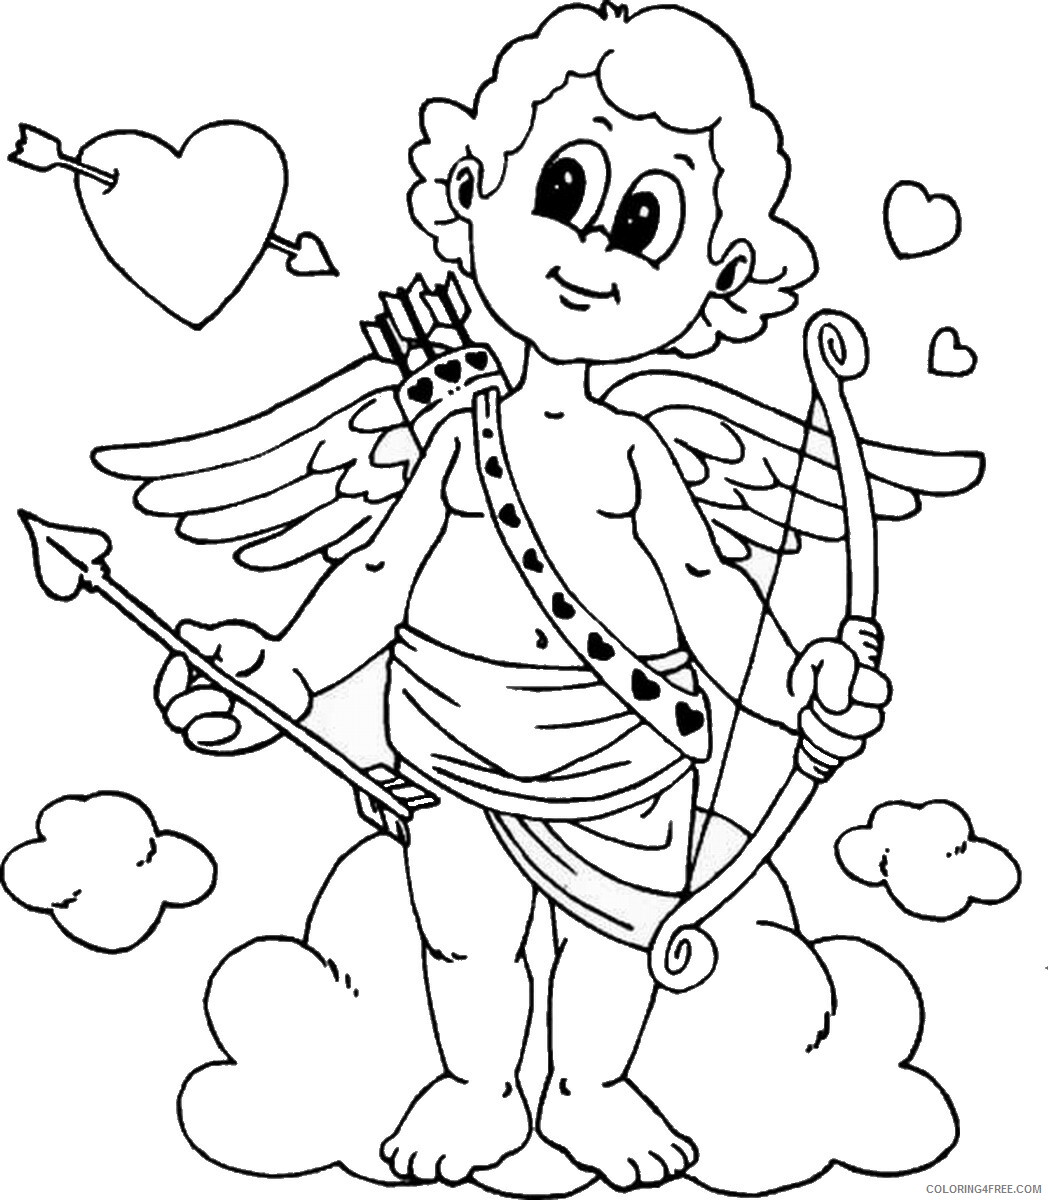 Valentines Day Coloring Pages Holiday Valentine_Day_Coloring29 Printable 2021 0986 Coloring4free